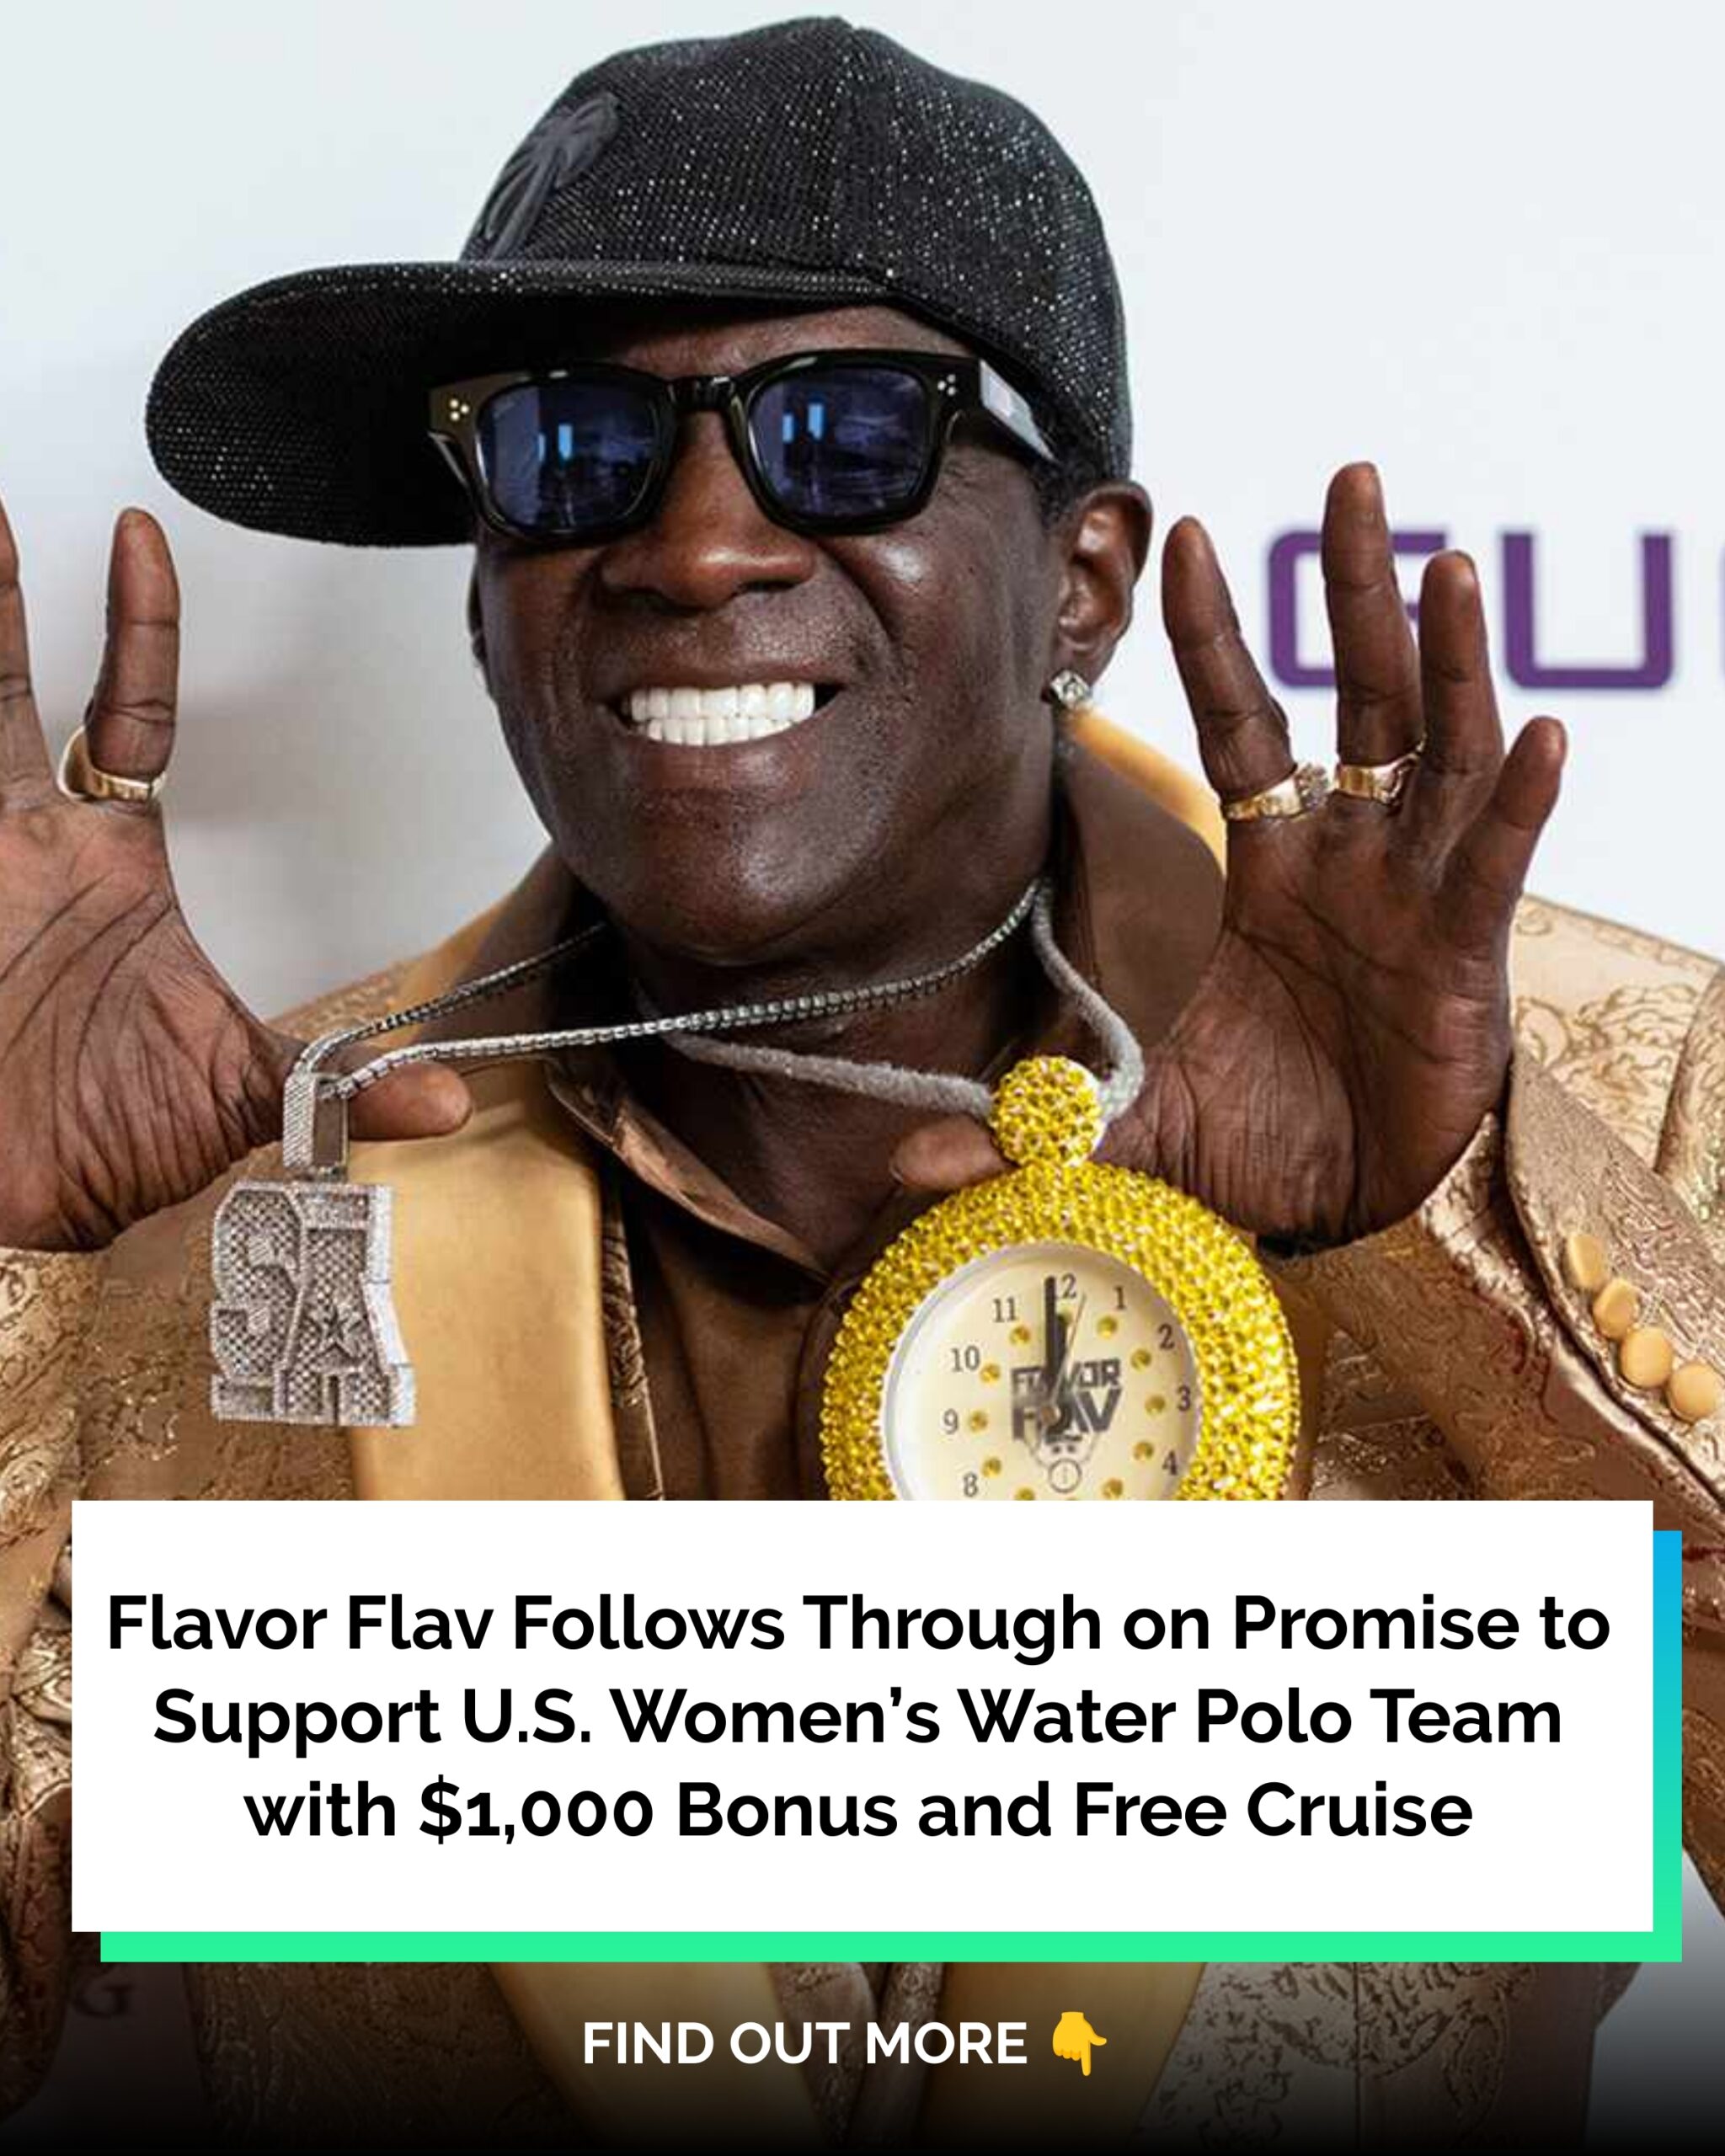 Flavor Flav Follows Through on Promise to Support U.S. Women’s Water Polo Team with $1,000 Bonus and Free Cruise